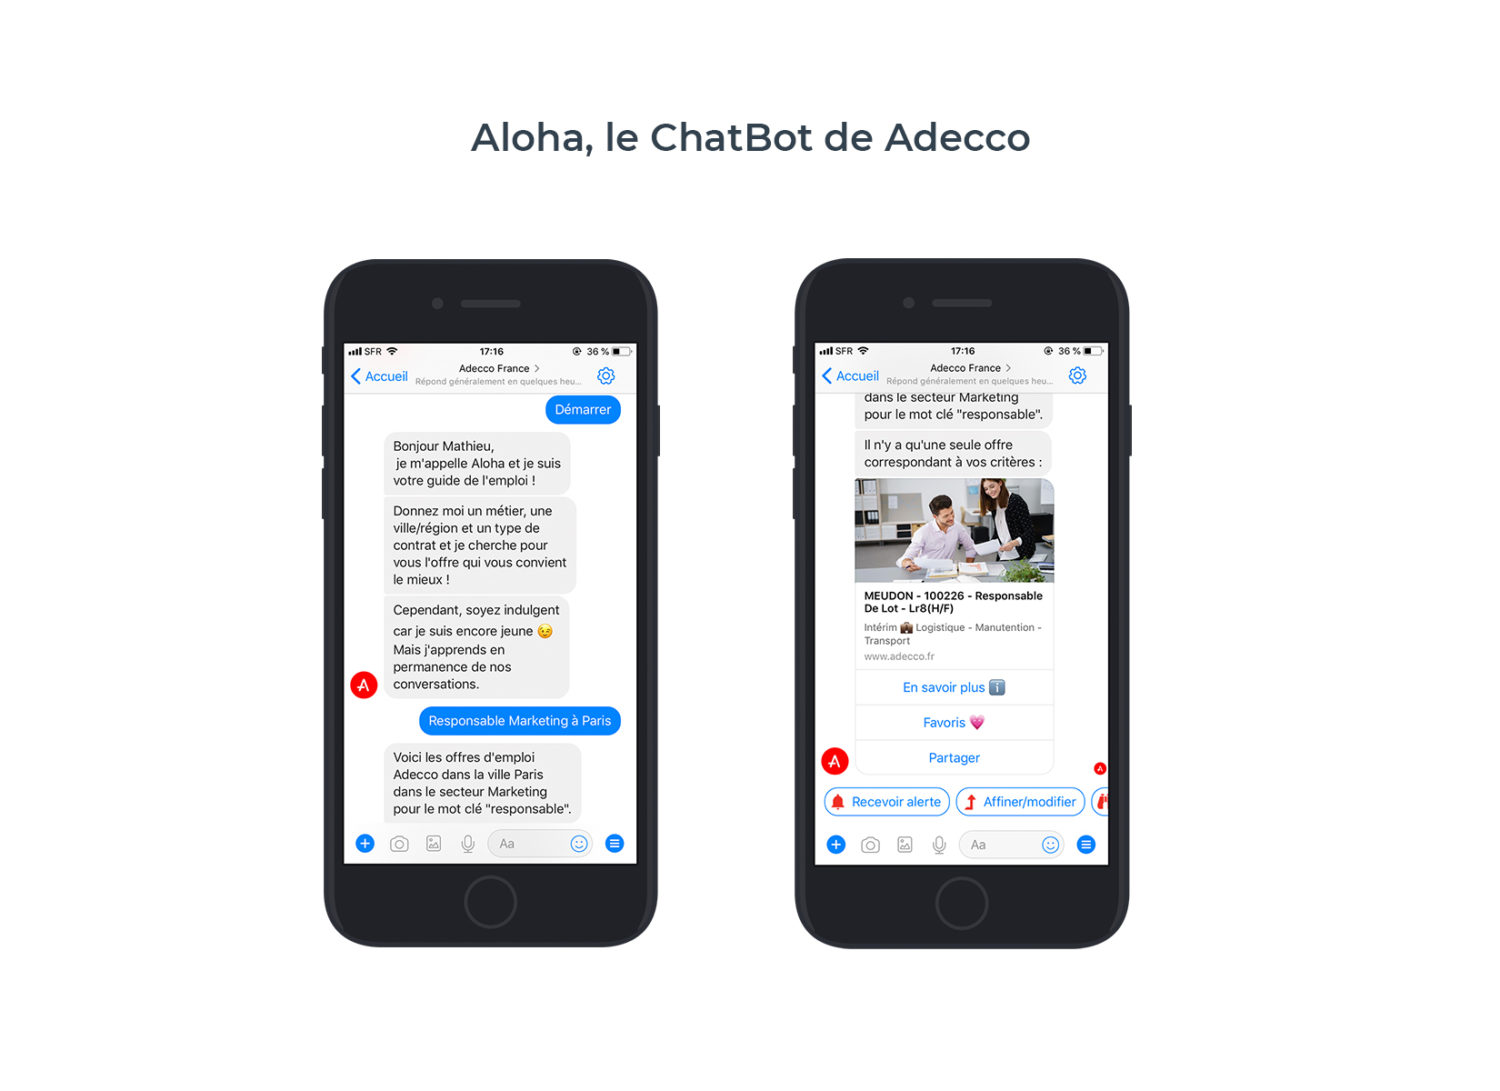 exemple chat bot de Adecco France